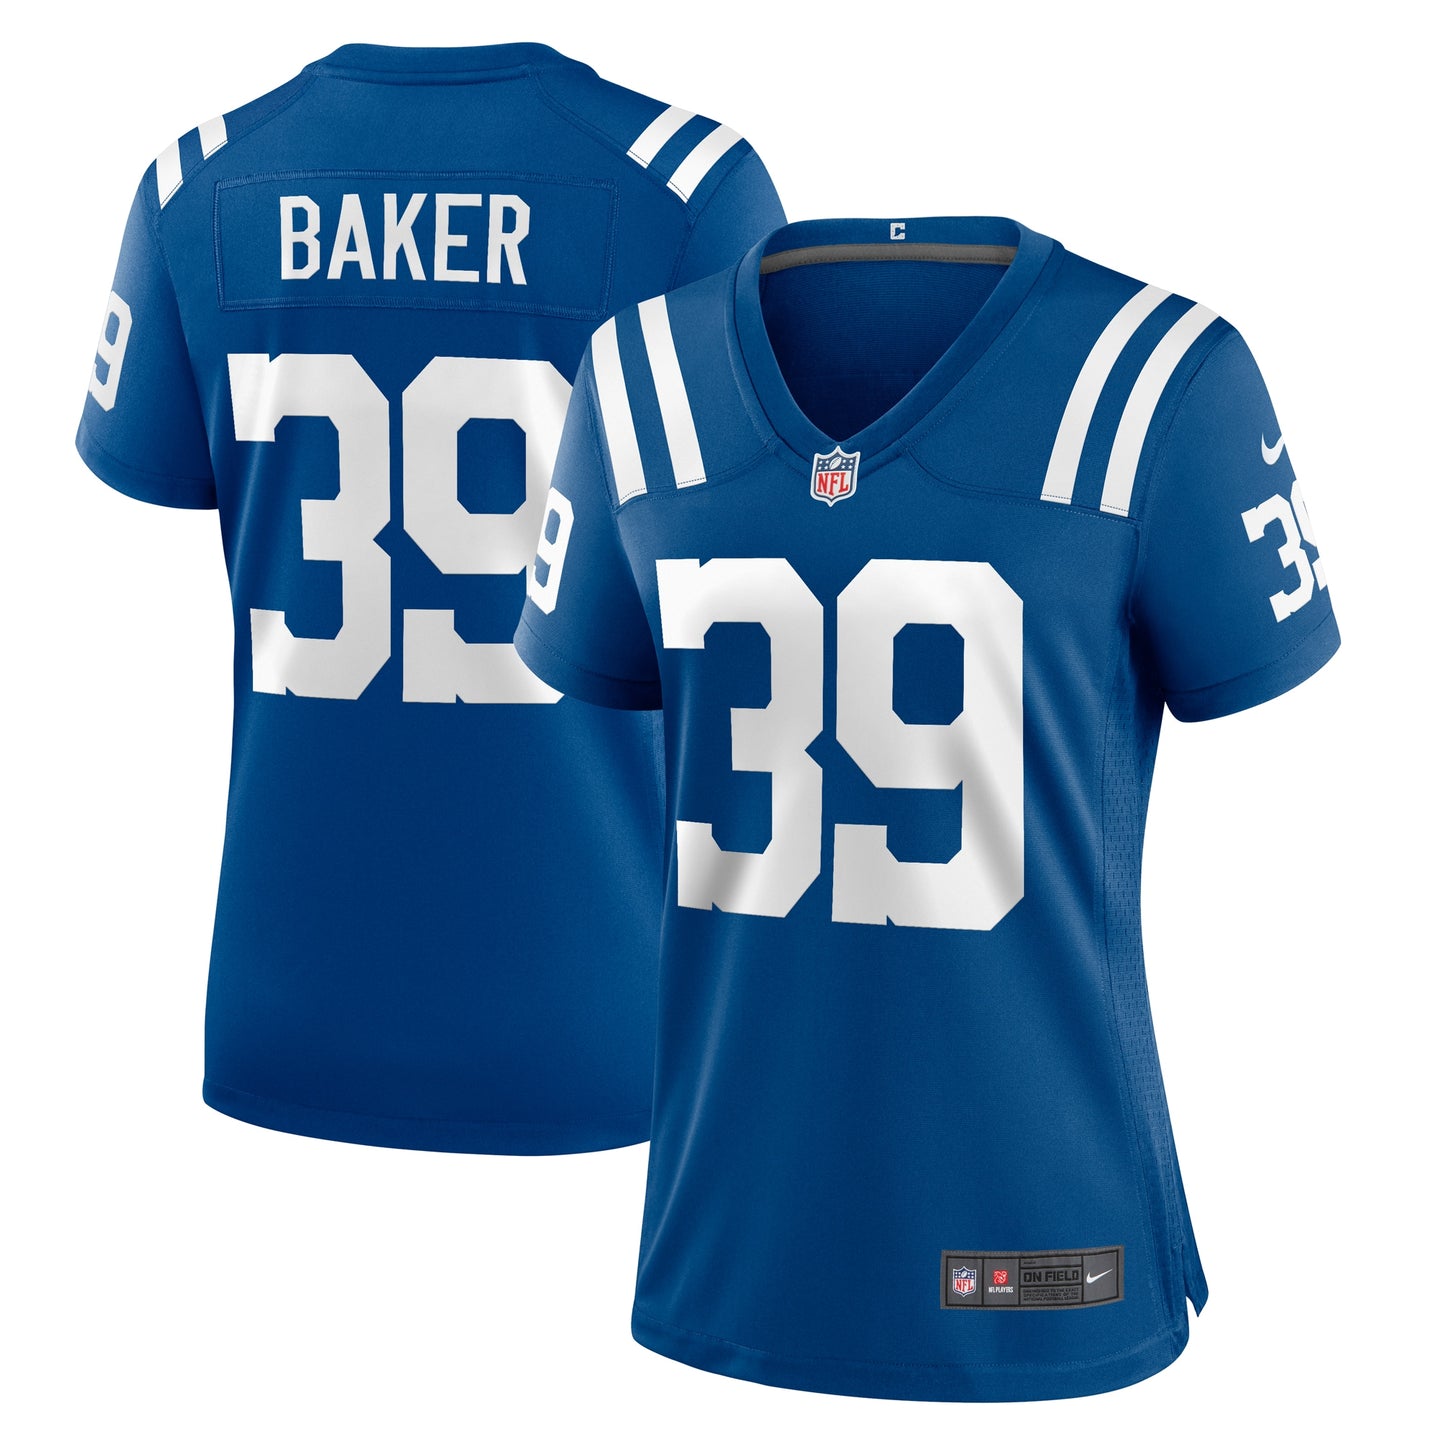 Darrell Baker Jr Indianapolis Colts Nike Women's Team Game Jersey - Royal